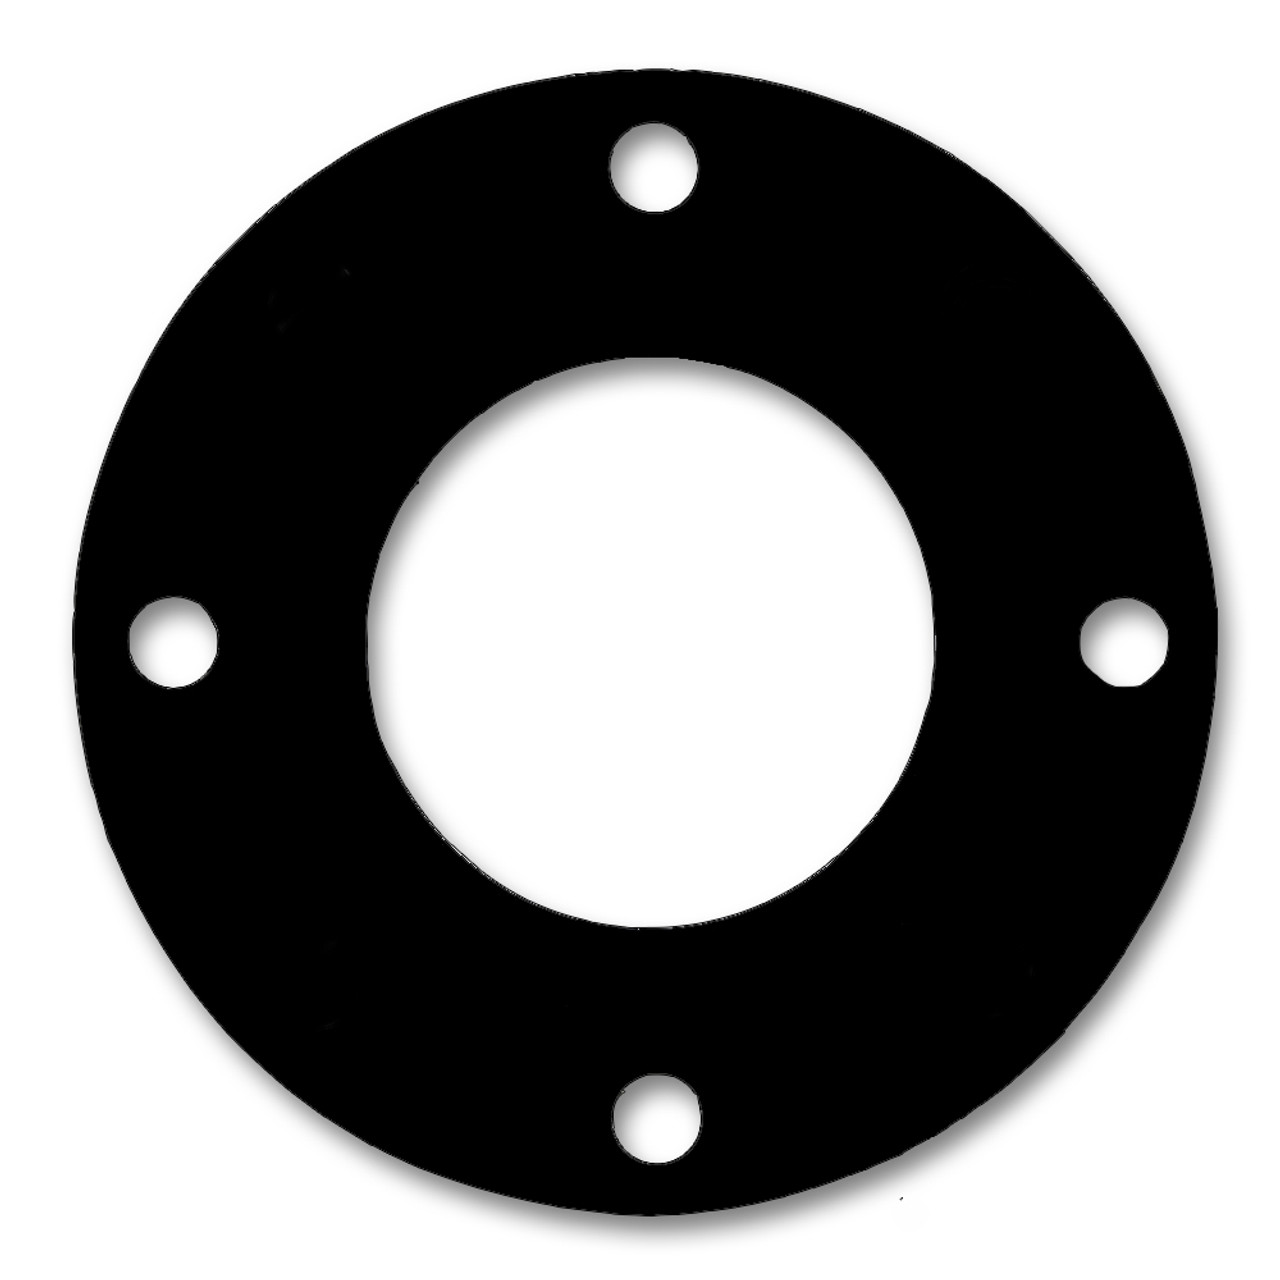 NSF-61 Certified EPDM, Full Face Gasket, Pipe Size: 3/4(0.75) Inches  (1.905Cm), Thickness: 1/8(0.125) Inches (3.175mm), Pressure Tolerance:  300psi, Inner Diameter: 1 1/16(1.0625)Inches (2.69875Cm), Outer Diameter: 4  5/8(4.625)Inches (11.7475Cm), With